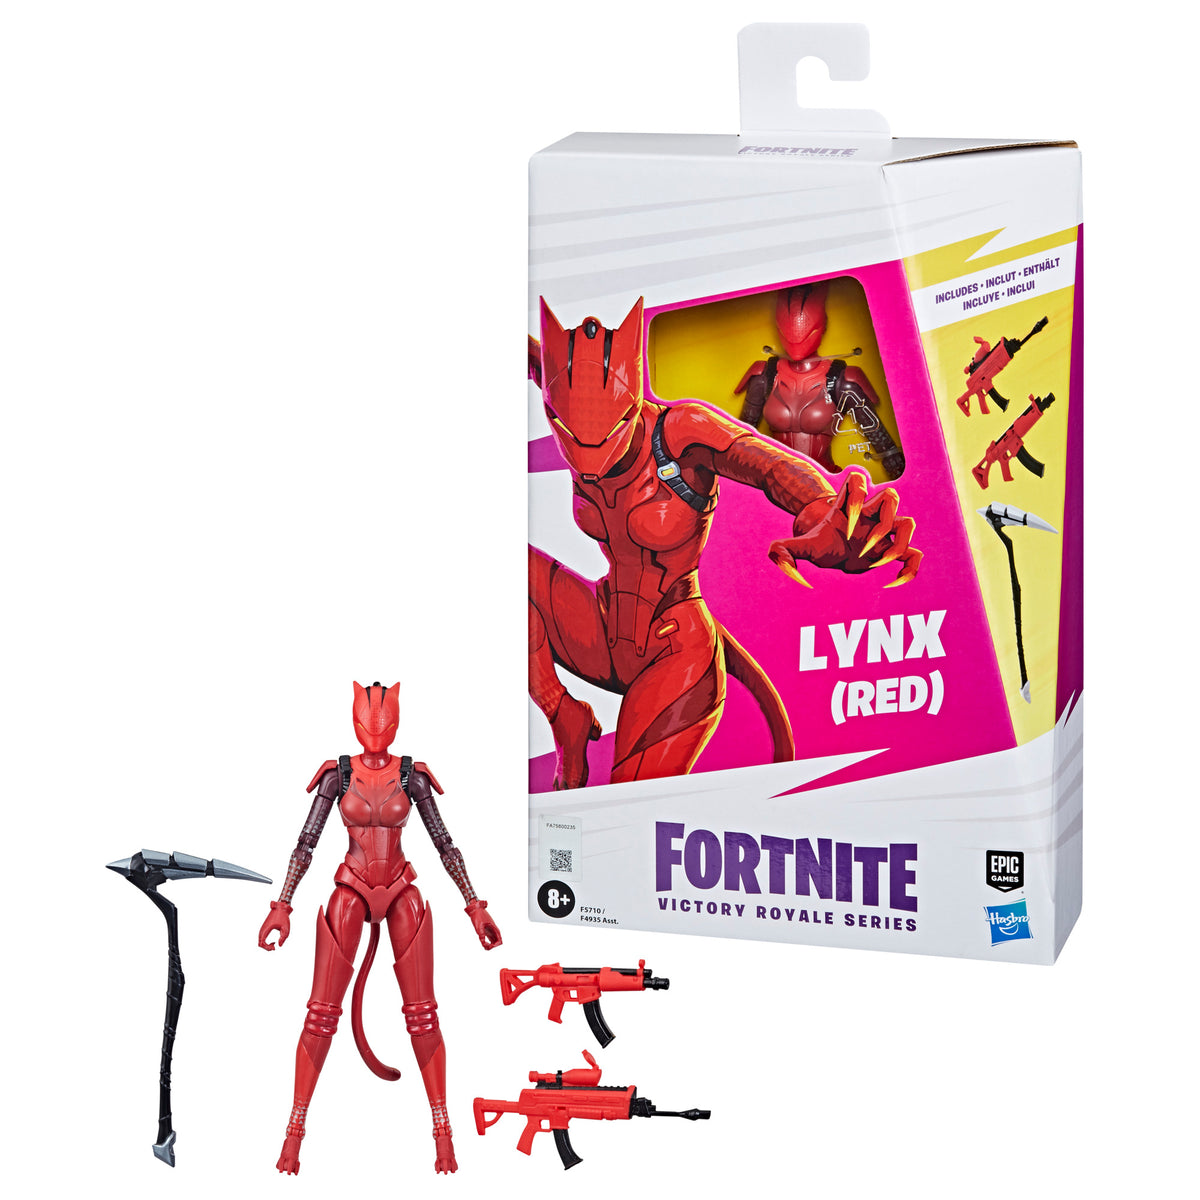 Fortnite Victory Royale Series Lynx (Red) – Pulse